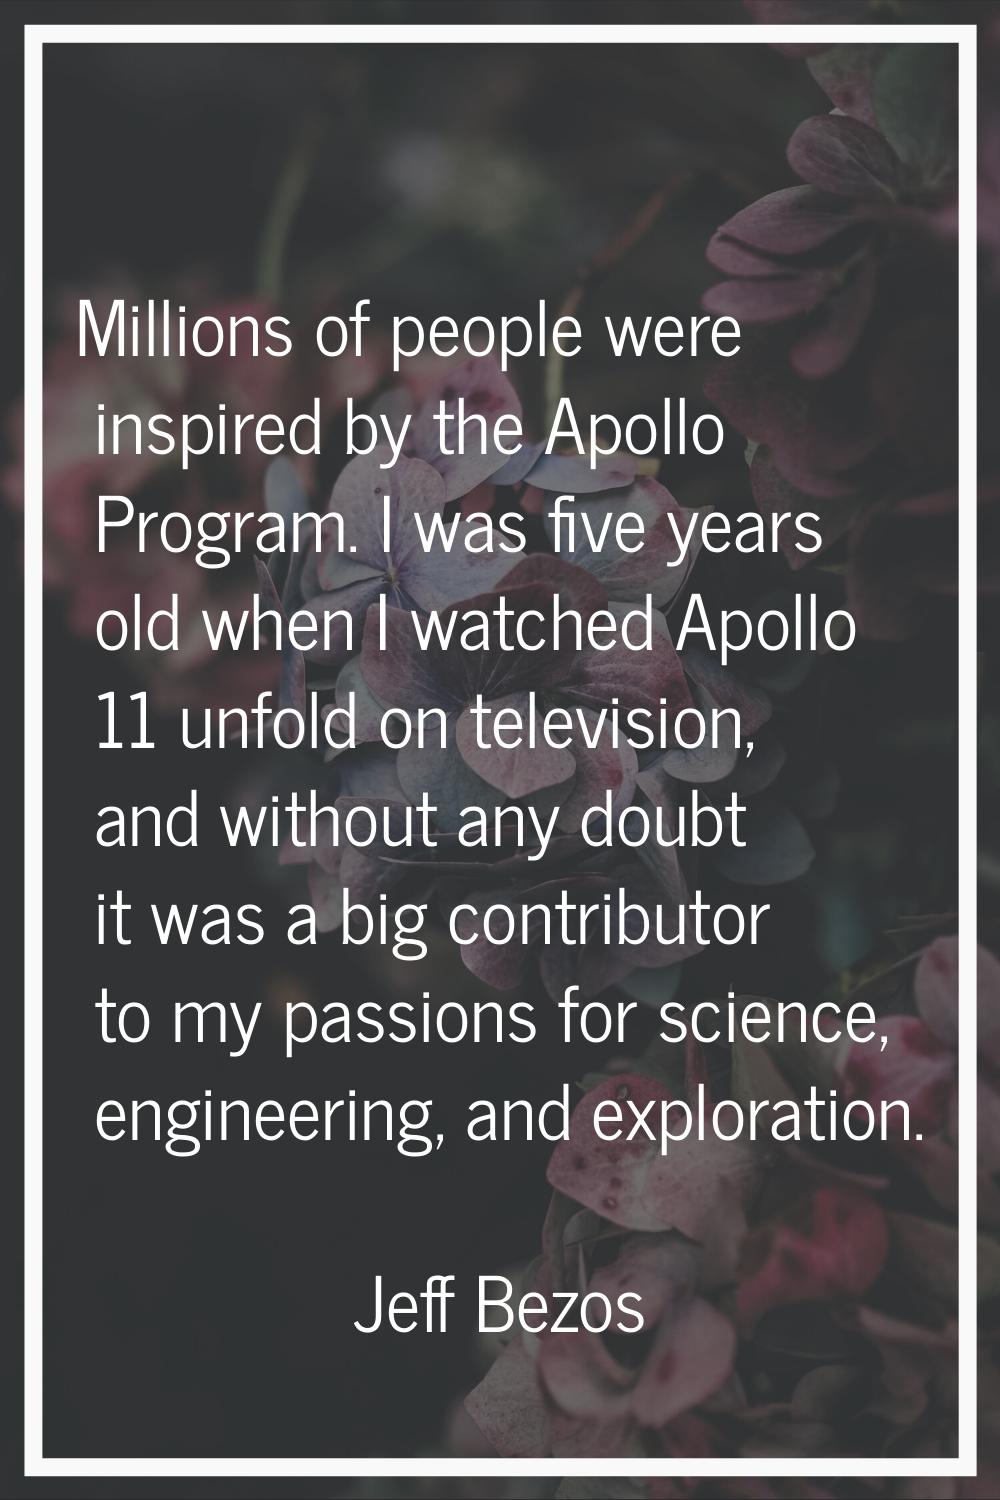 Millions of people were inspired by the Apollo Program. I was five years old when I watched Apollo 